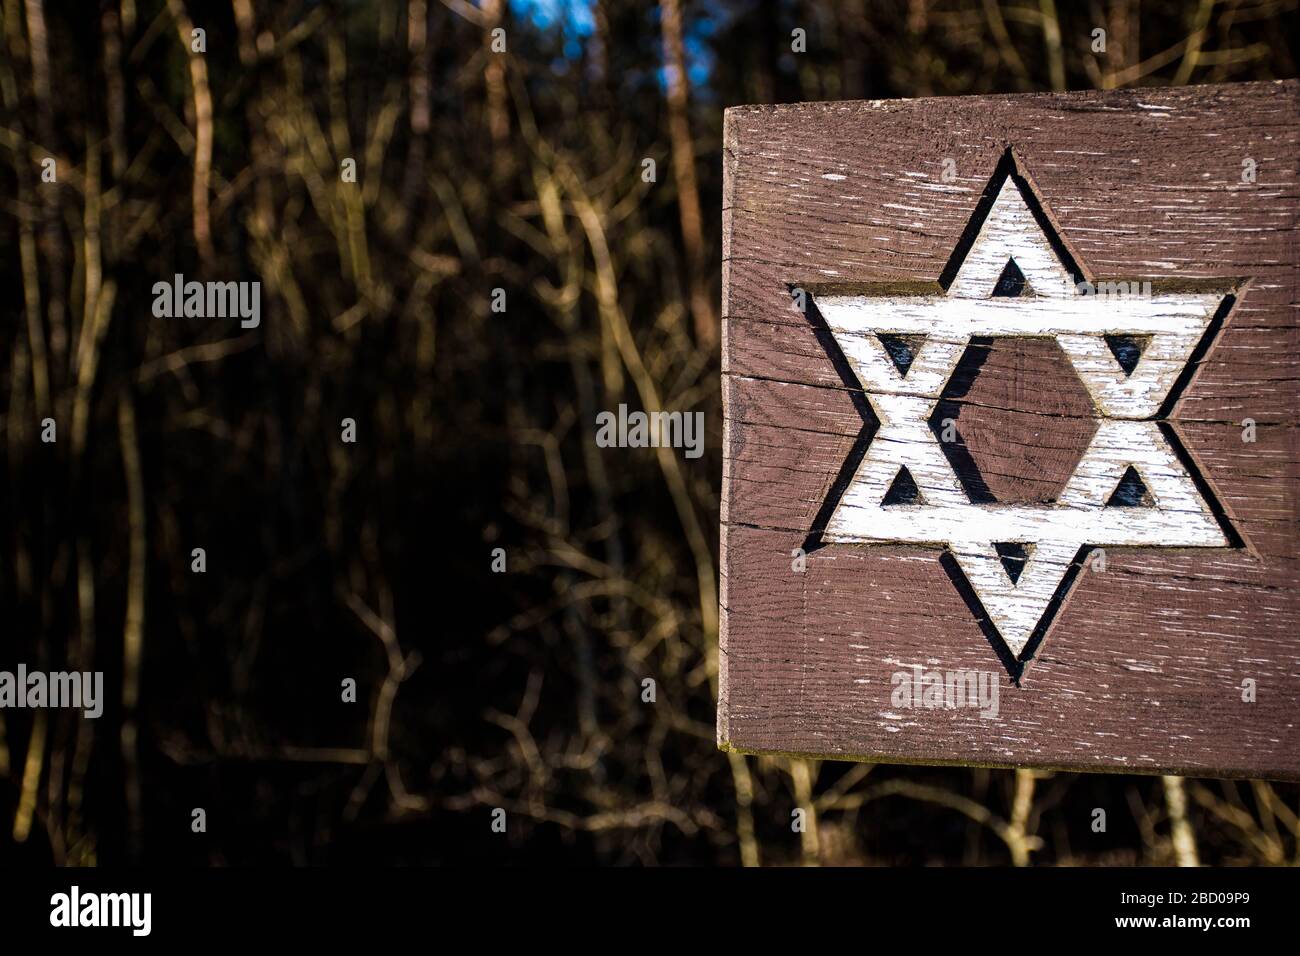 Star of David, symbol of Judaism, the symbol of the Jews, Israel, white star engraved on a wooden board Stock Photo